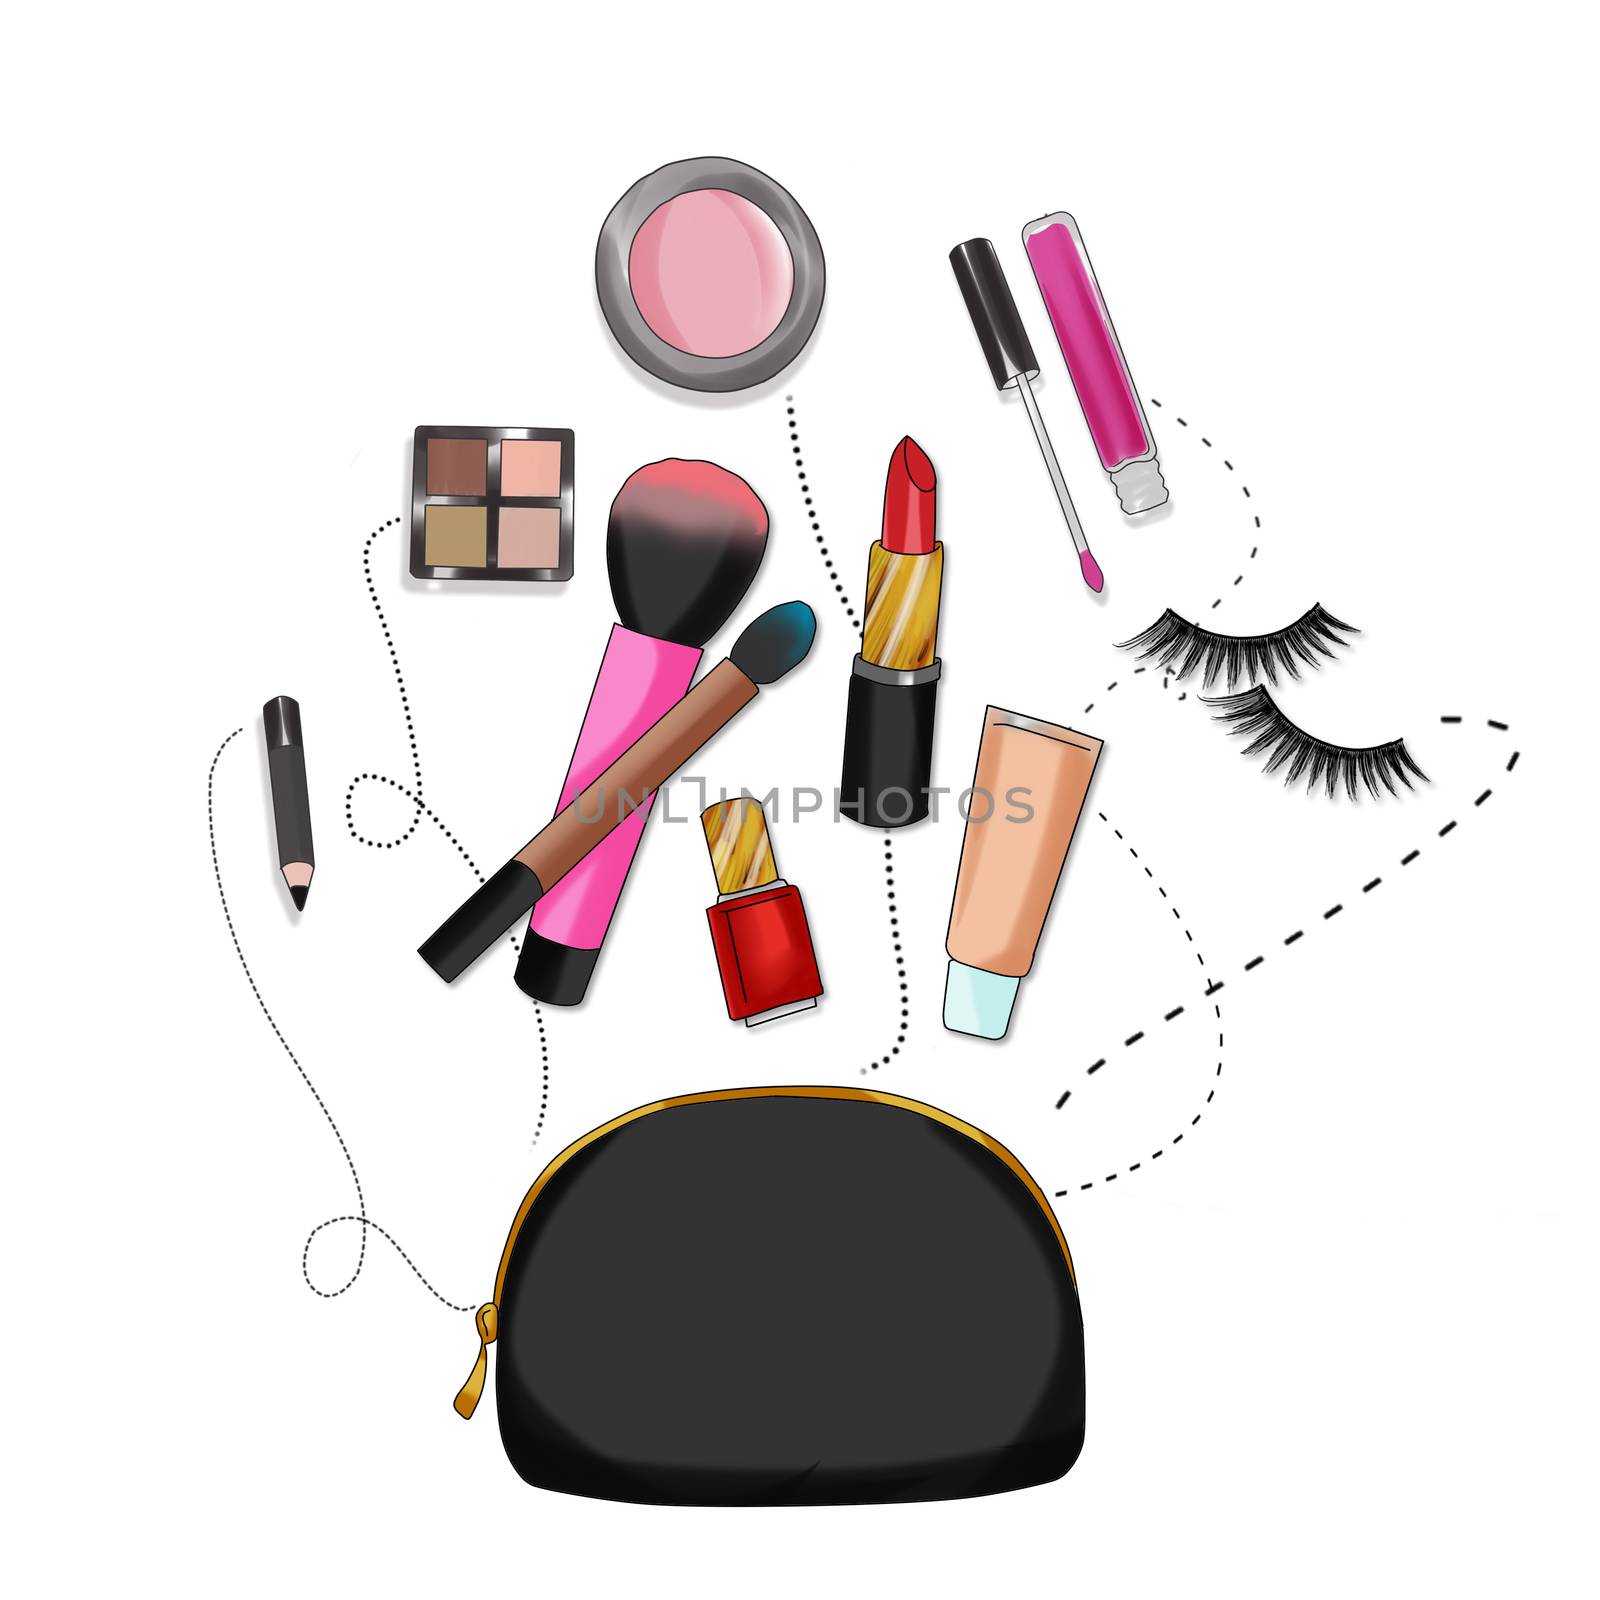 Fashion Illustration background - Beauty bag with make up and cosmetics